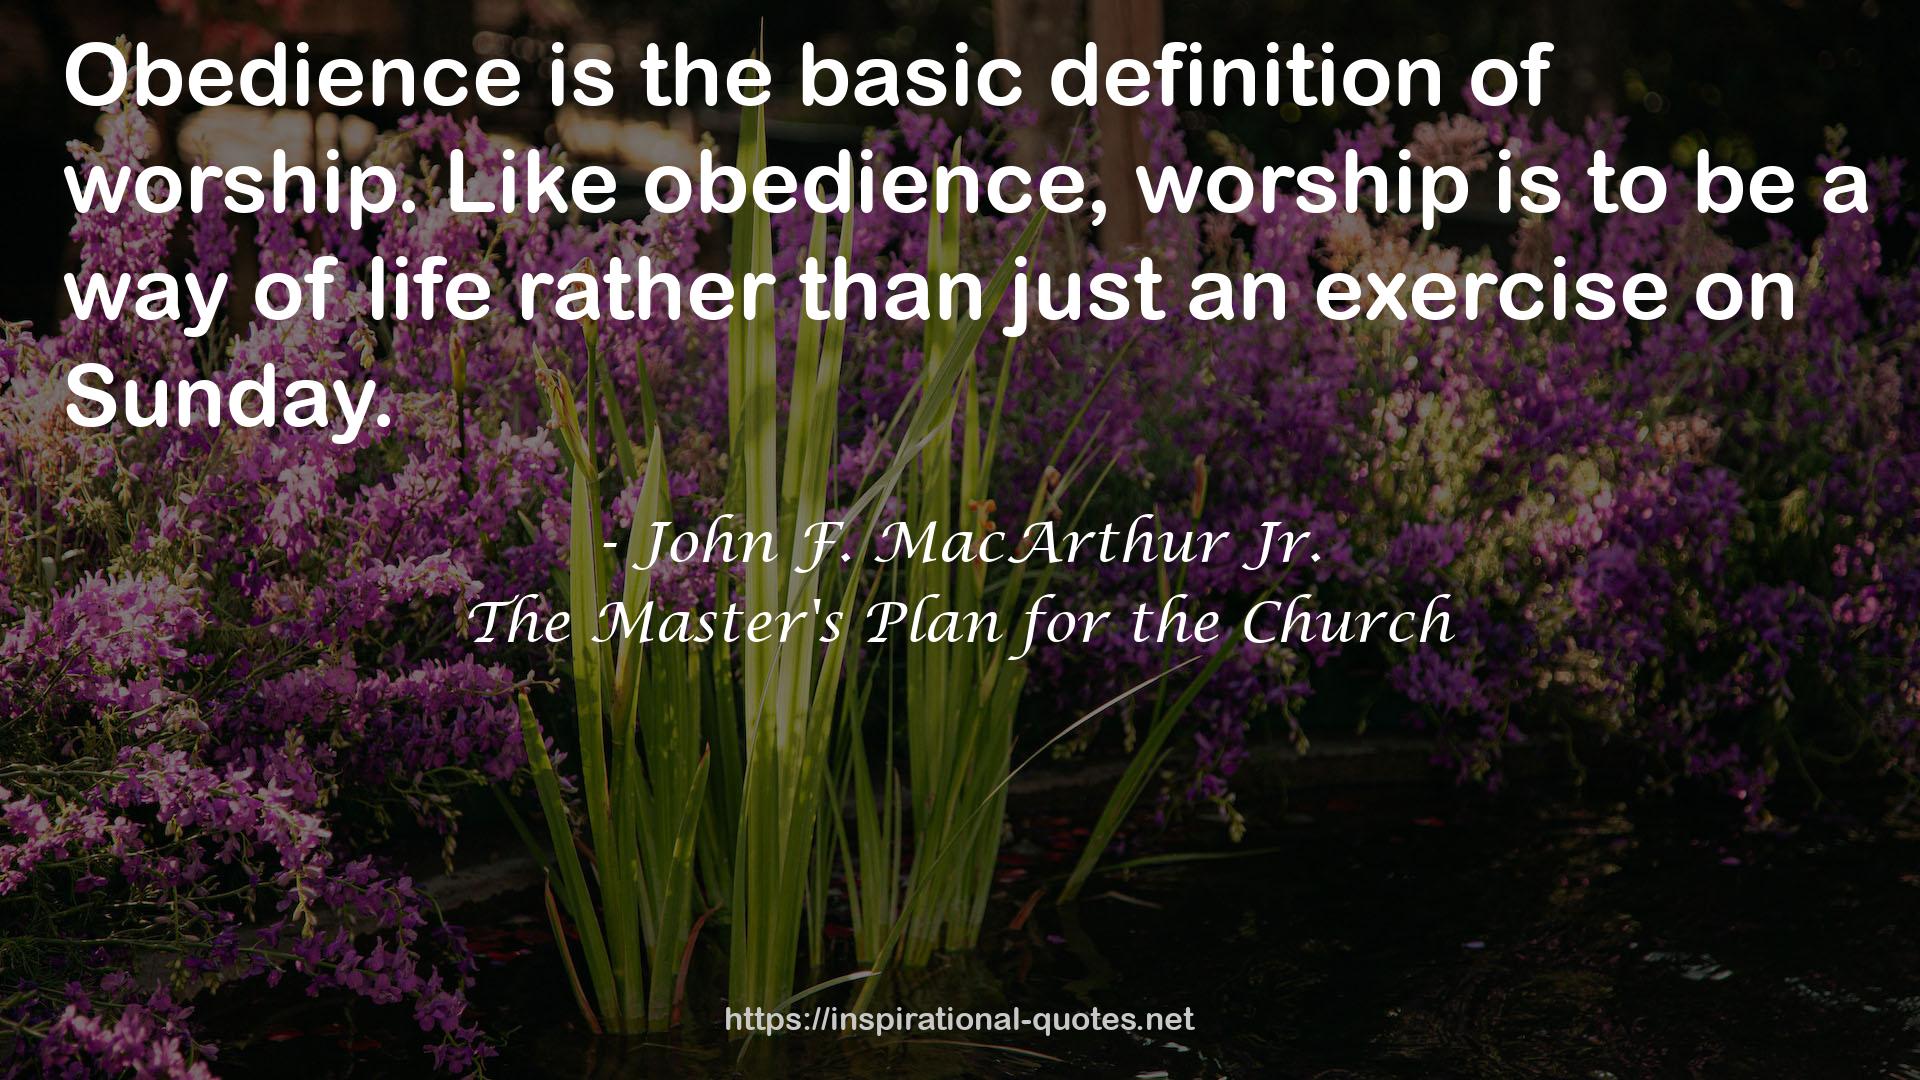 The Master's Plan for the Church QUOTES